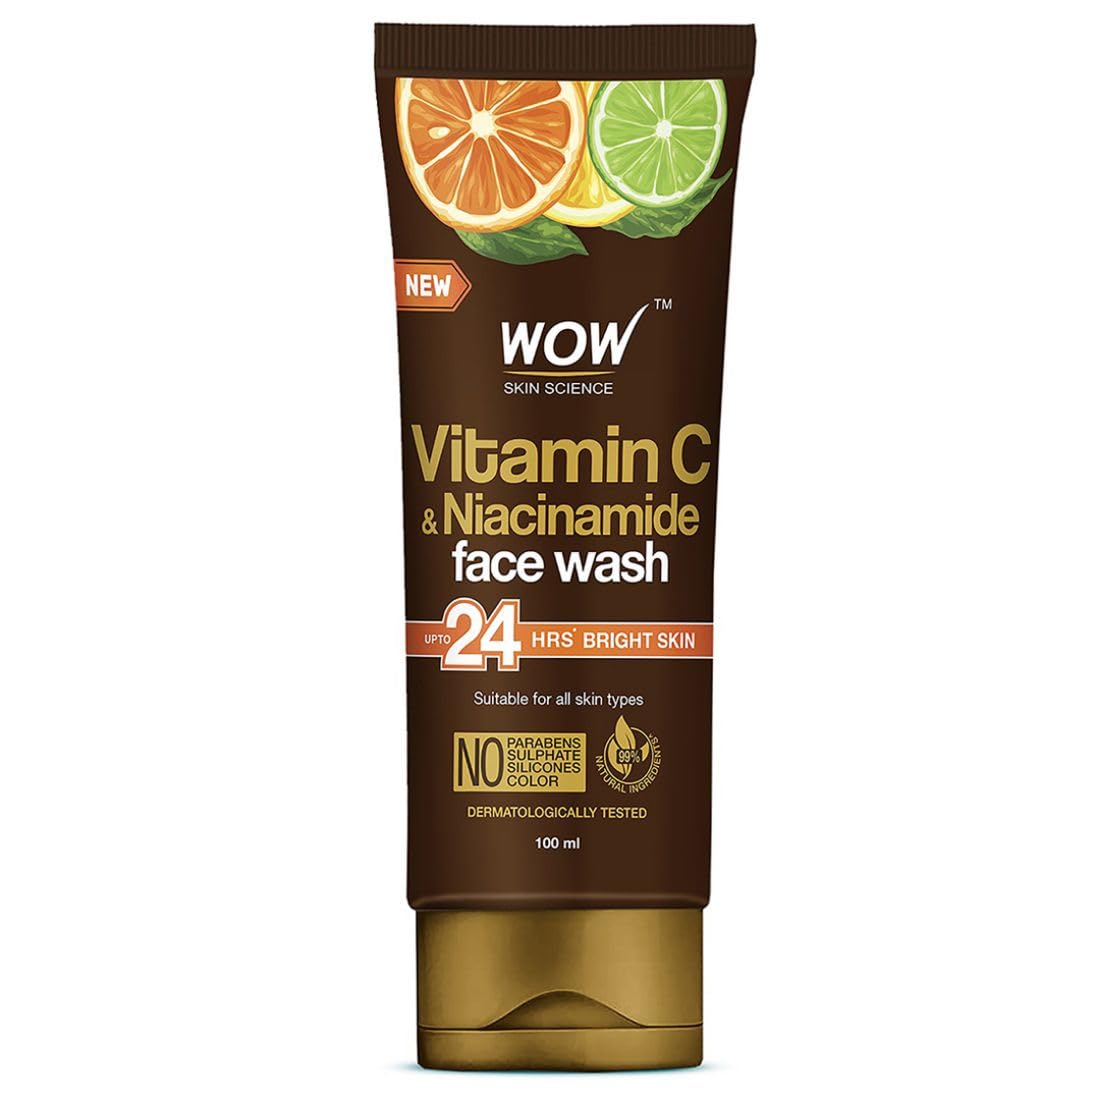 WOW Skin Science Brightening Vitamin C Face Wash - No Parabens, Sulphate, Silicones & Color (100mL)